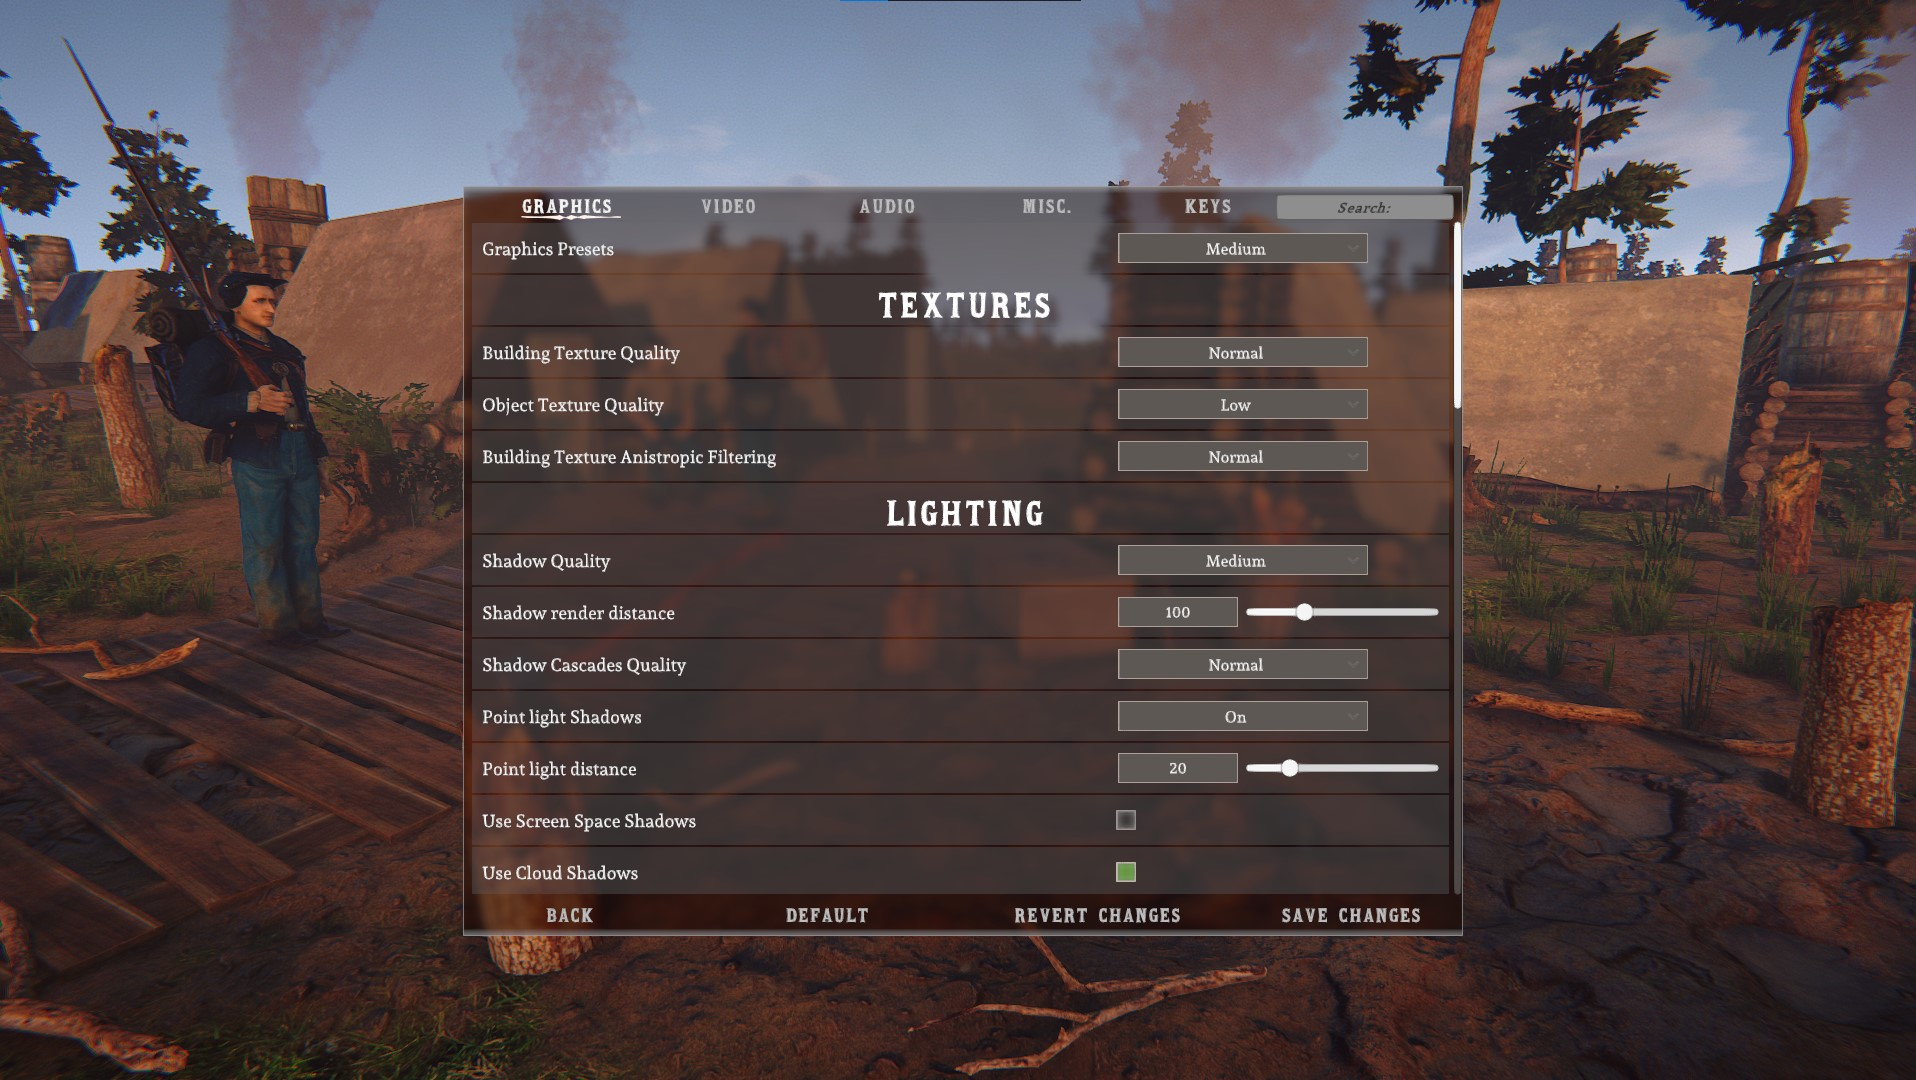 Solution #3 Graphic Settings